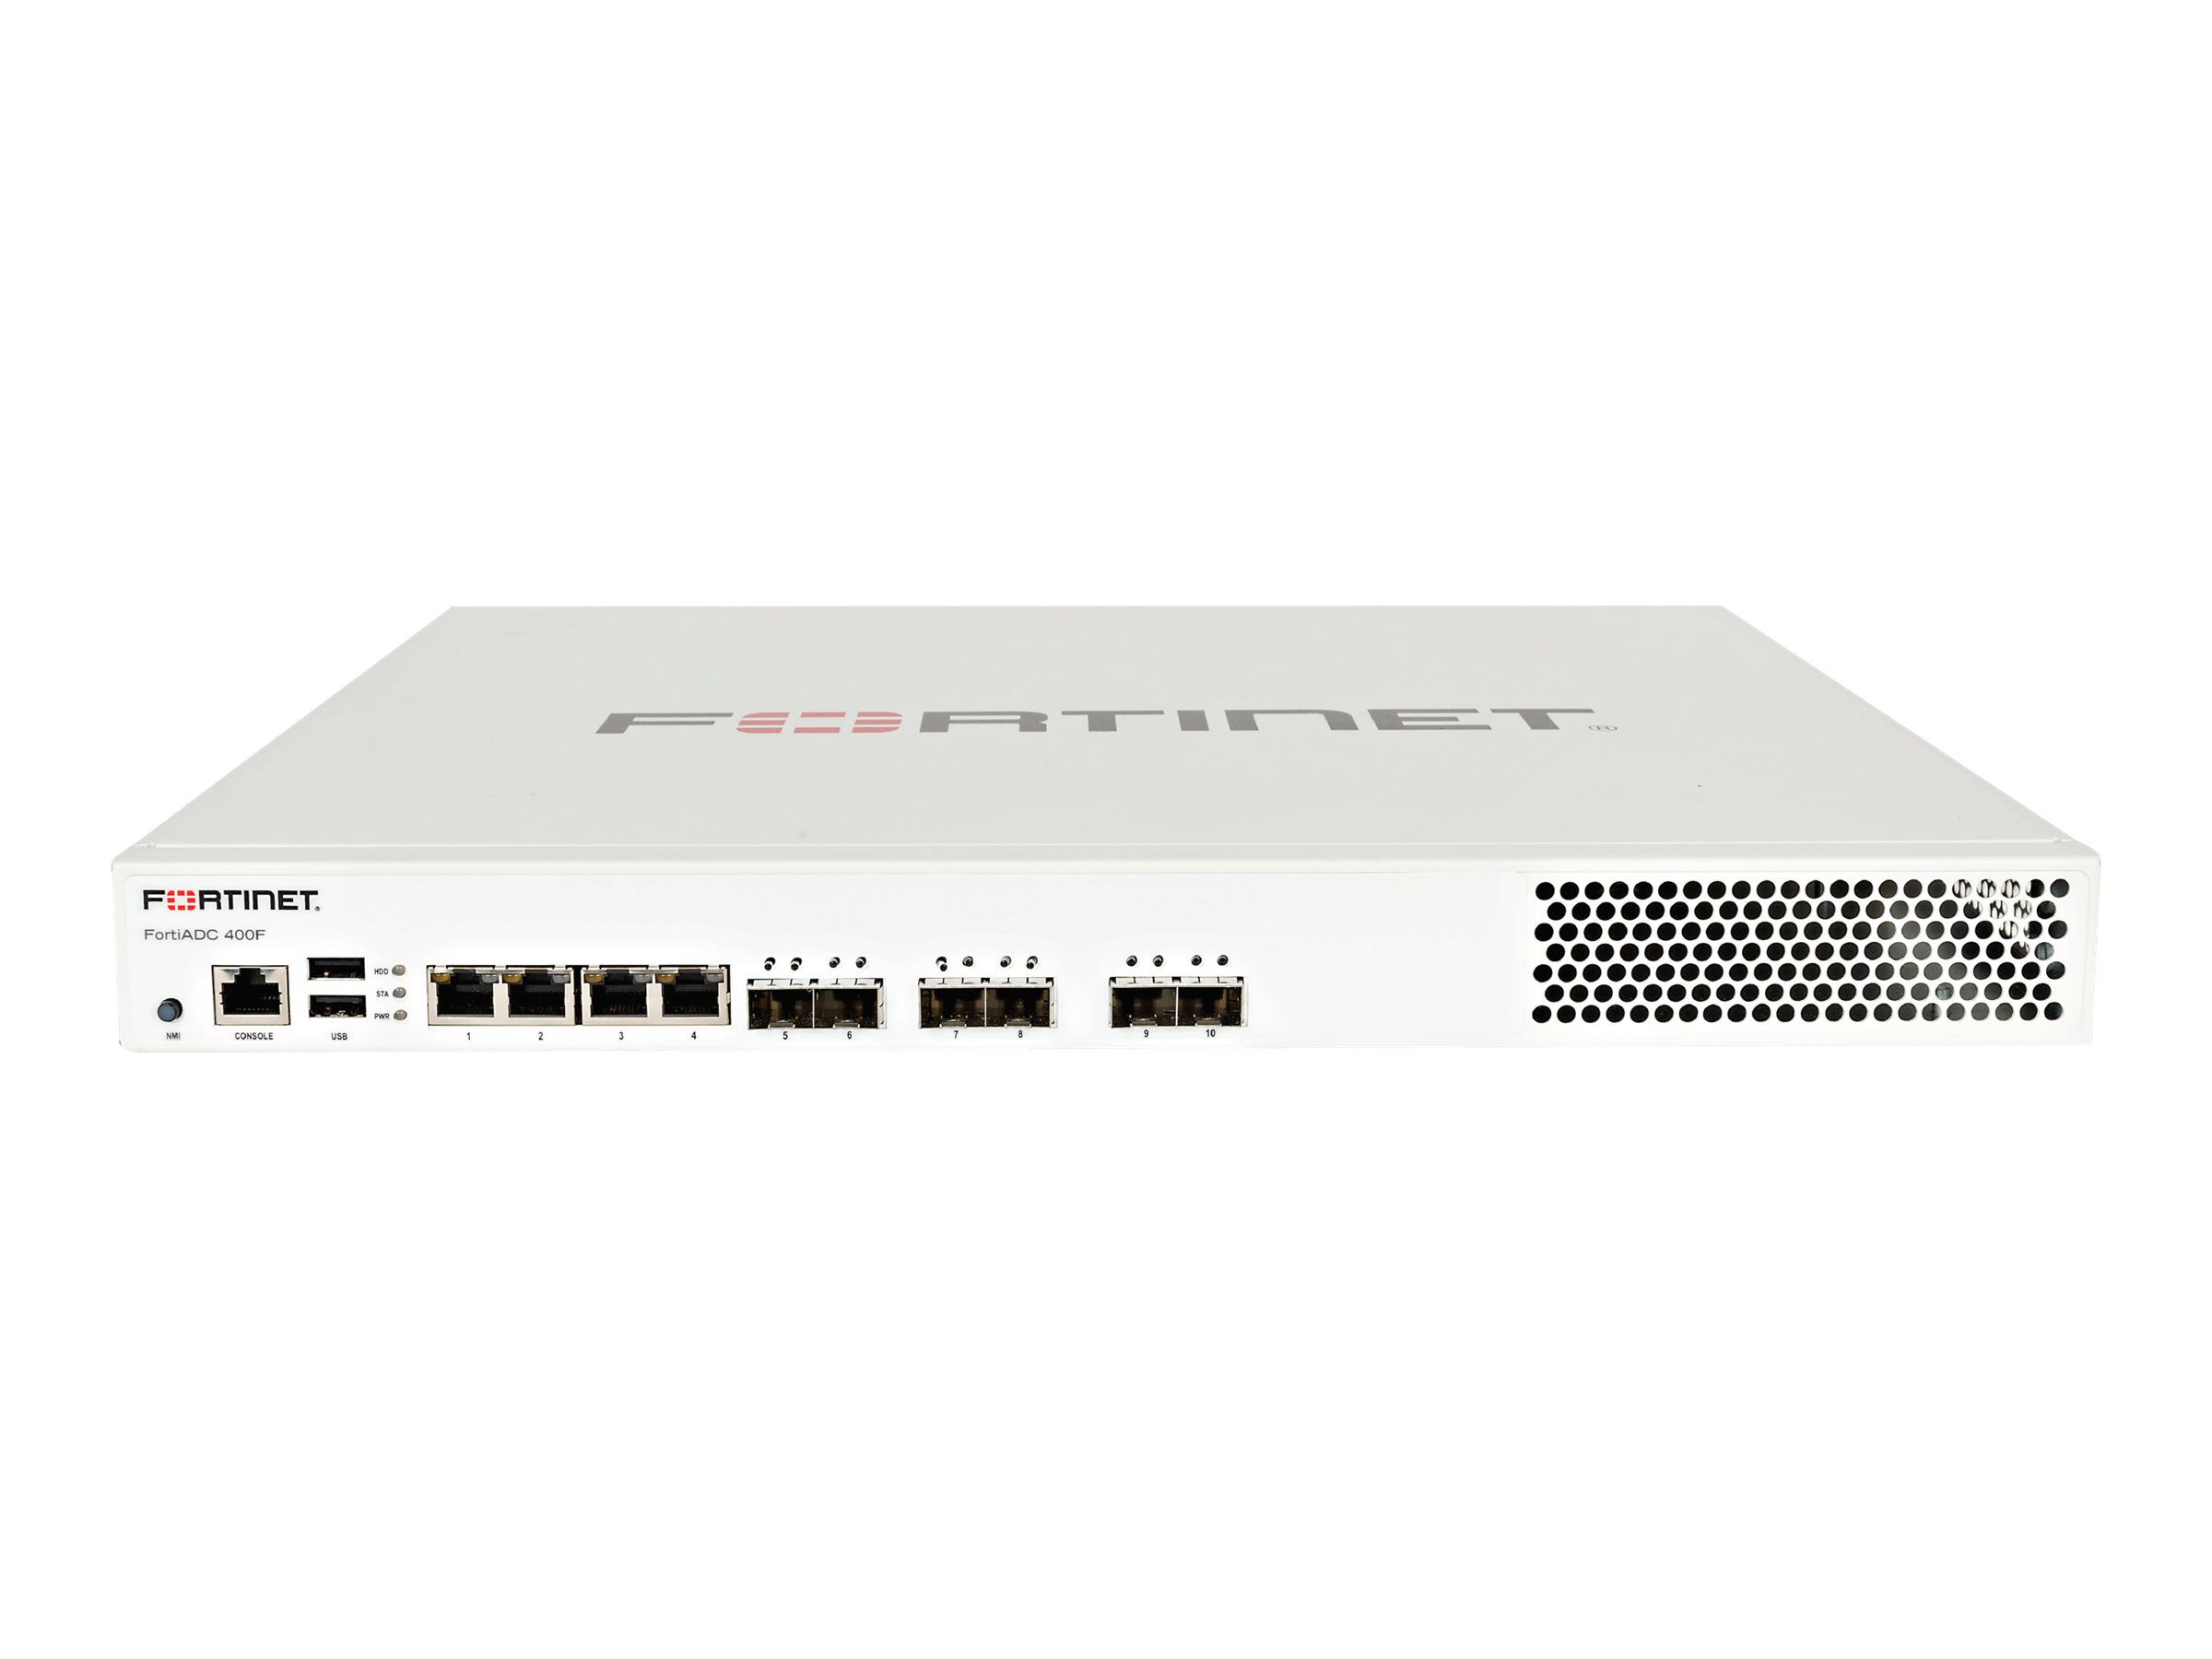 Fortinet ask for better price 12m Warranty FortiADC 400F - Anwendungsbeschleuniger - mit 5 years 24x7 FortiCare and FortiADC Sta